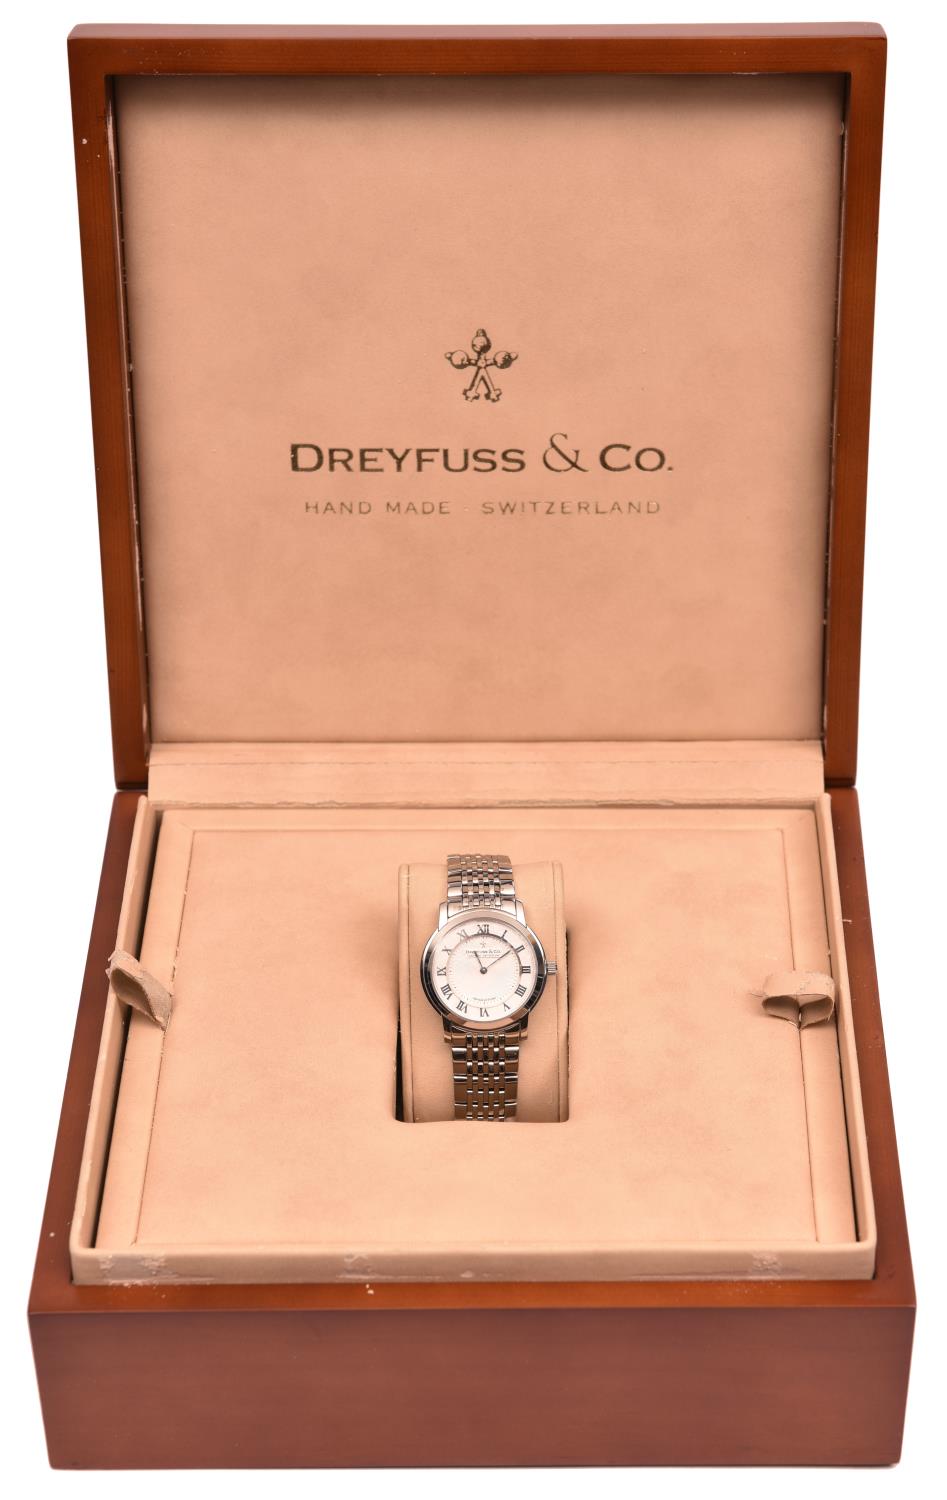 A Dreyfuss & Co. DGB00010/01 Series 1980 watch with quartz movement. Stainless steel case and - Image 3 of 4